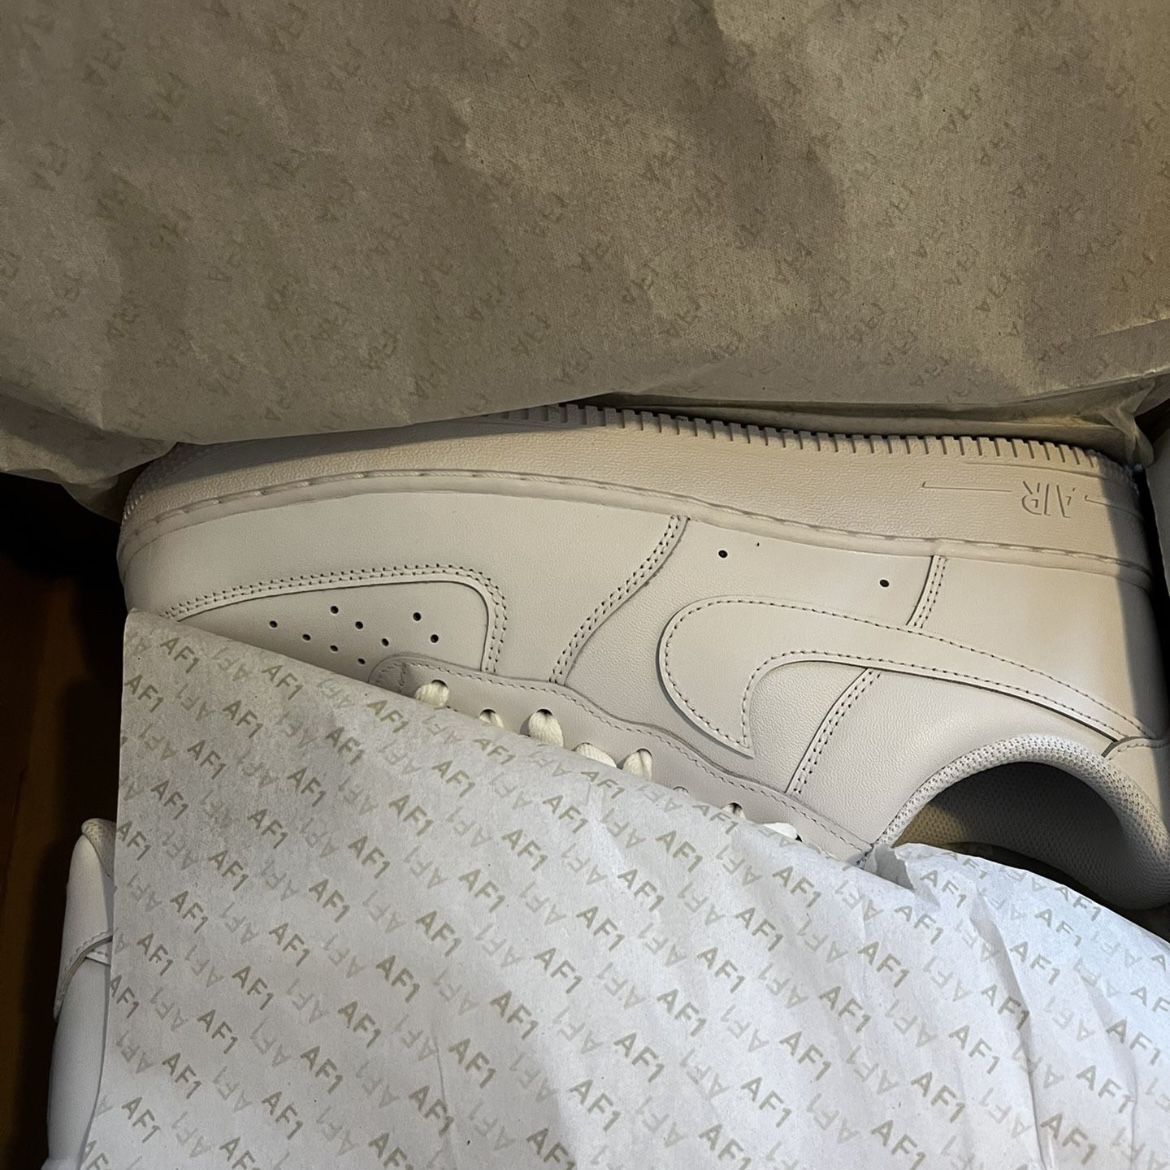 Louis Vuitton Off White Air Force Collab for Sale in White Oak, MD - OfferUp